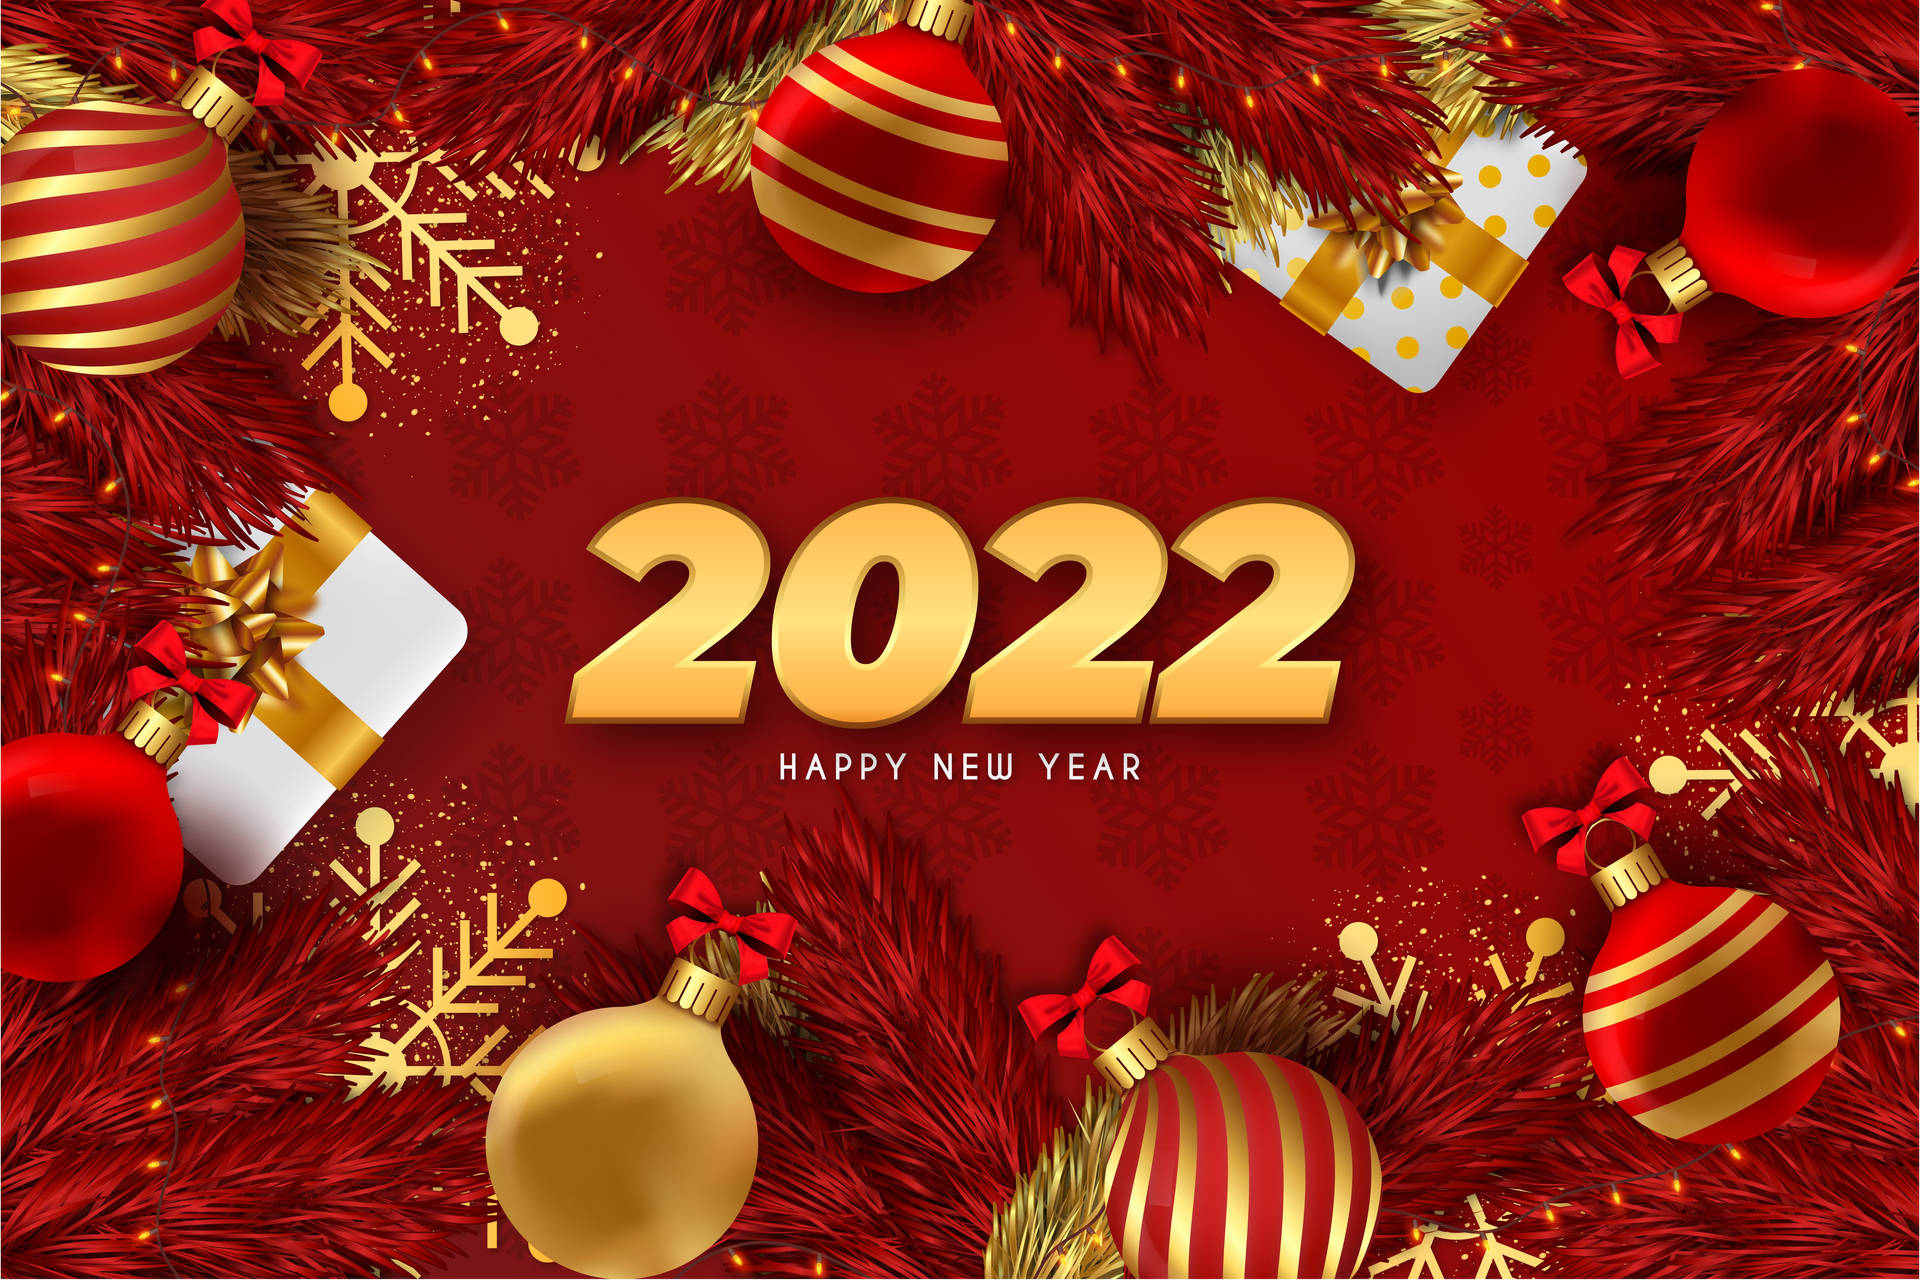 Happy New Year 2022 Red Ornaments